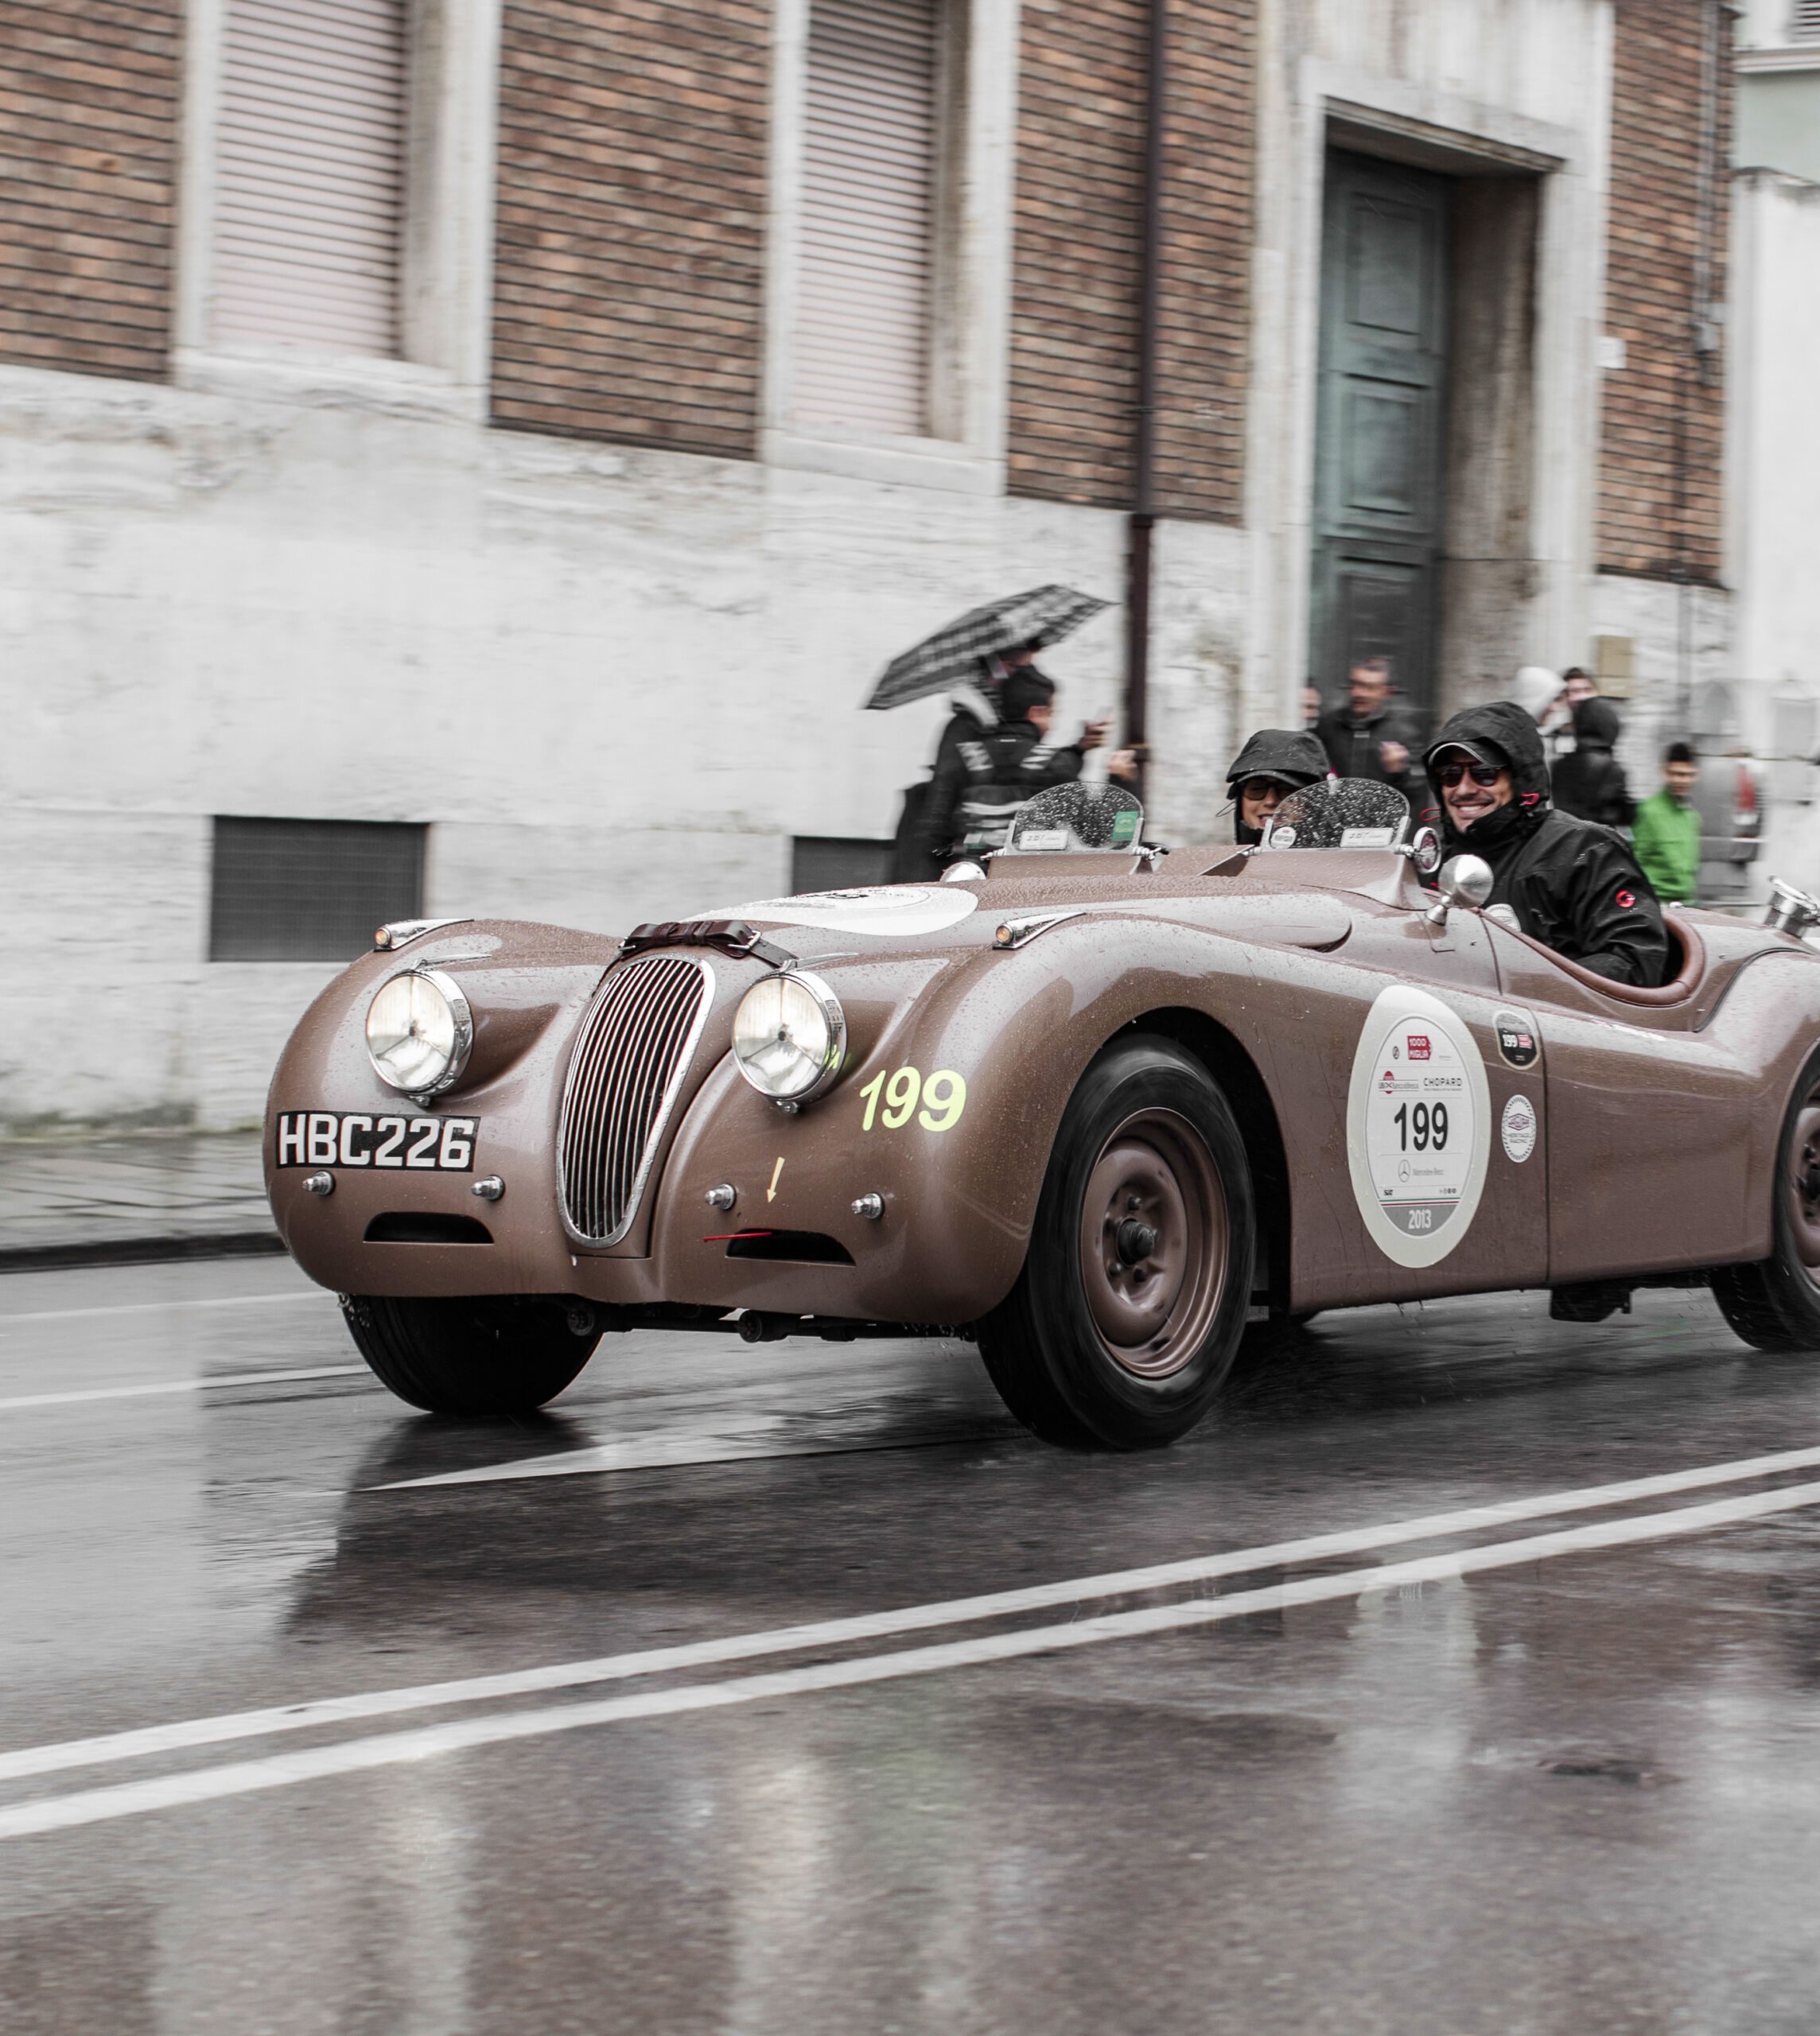 Roland Iten commemorates the Mille Miglia race with a very special